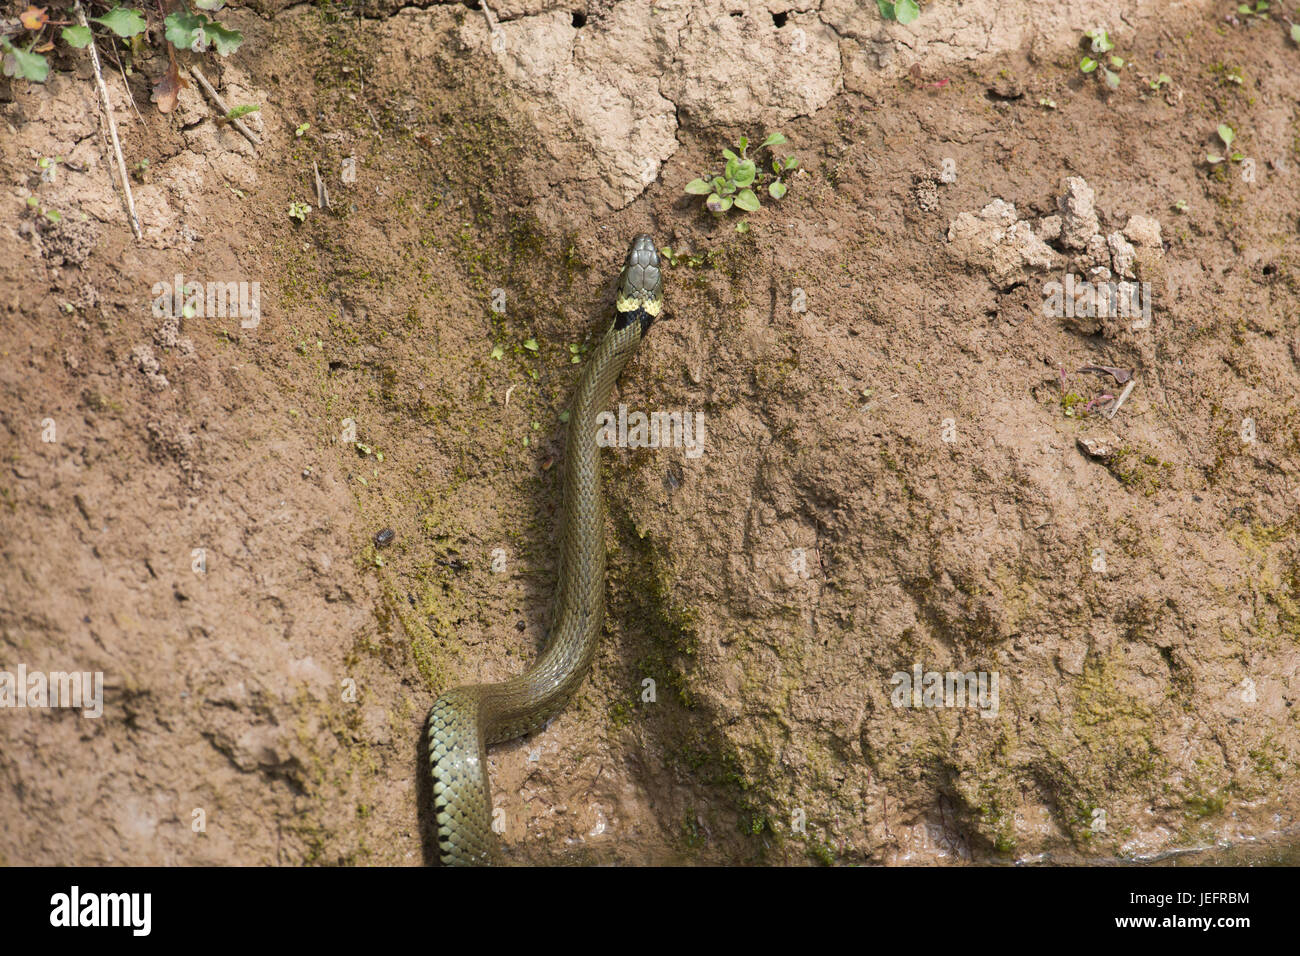 Grass Snake Natrix natrix. Climbing up the bank of a stream, using muscular body and ventral scales in attempts to gain purchase on wet clay surface. Stock Photo